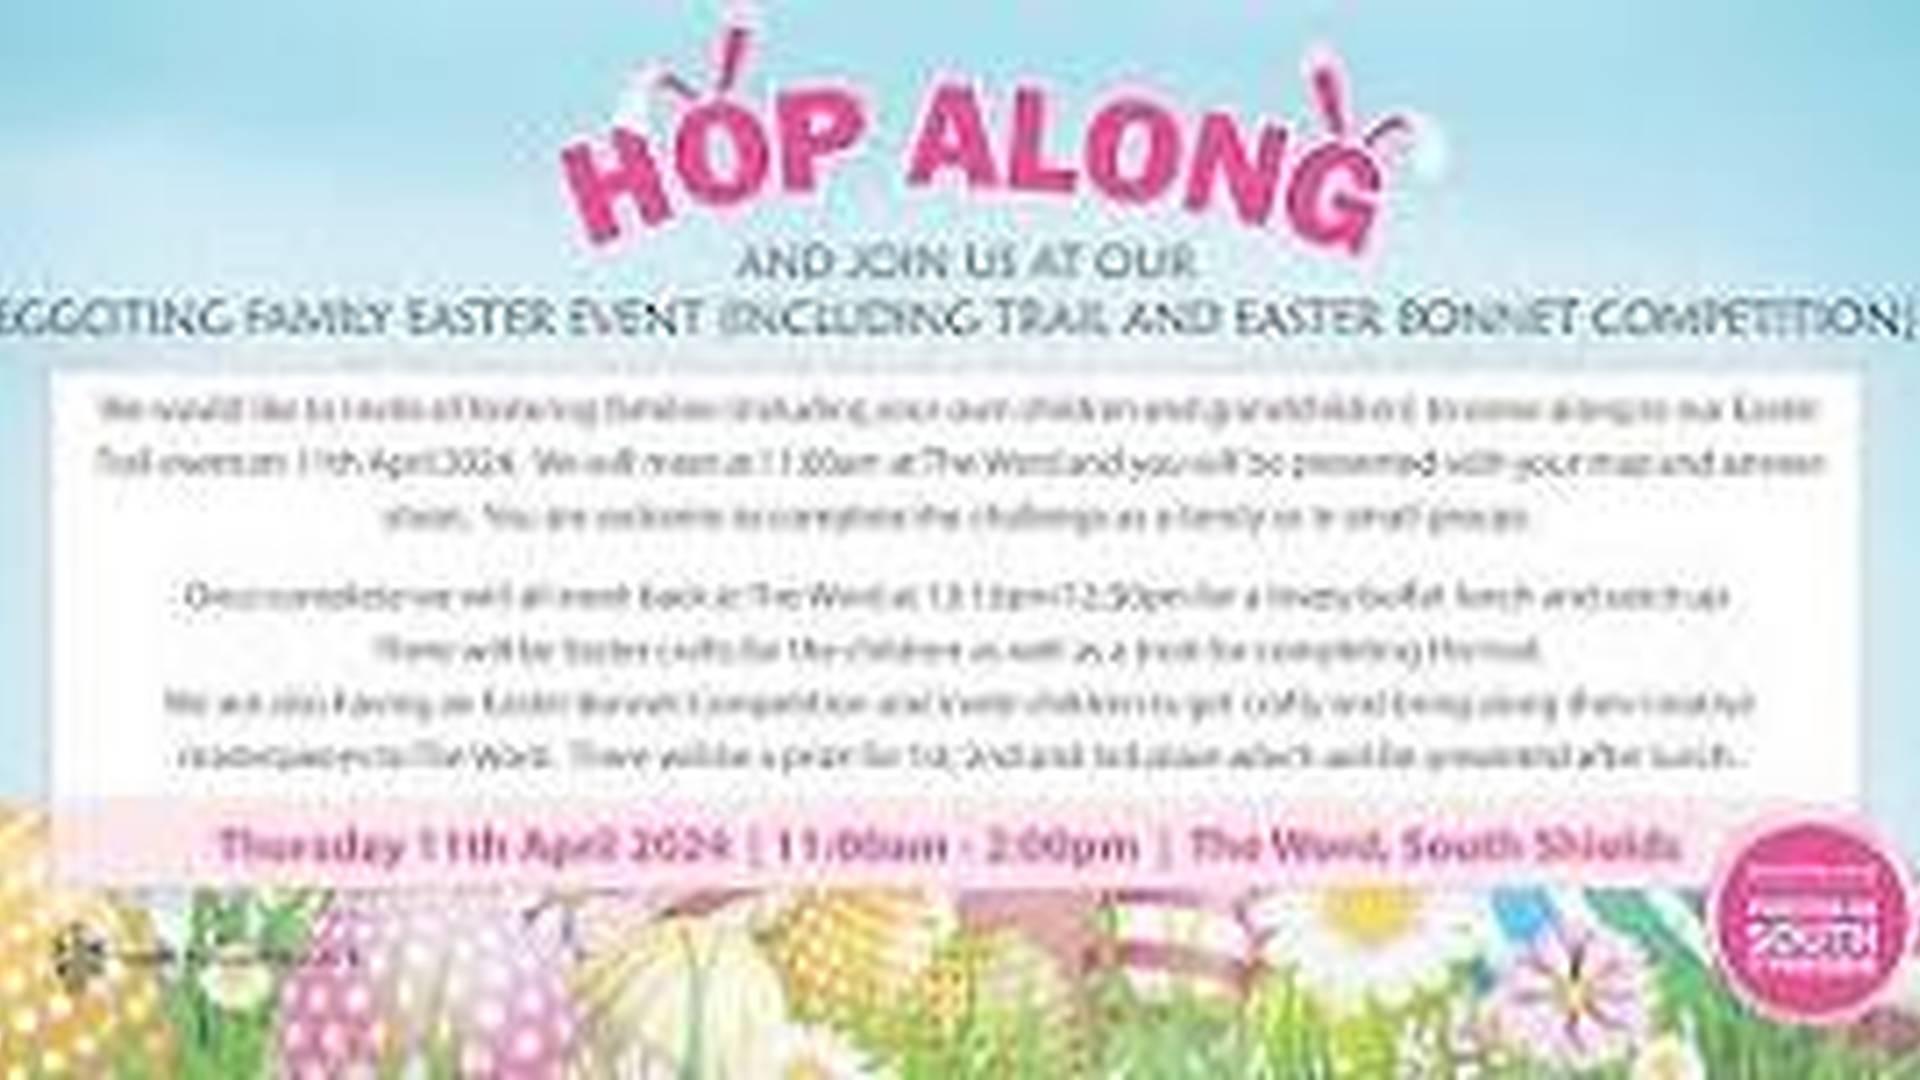 Family Event - Easter Trail and Easter Bonnet Competition photo